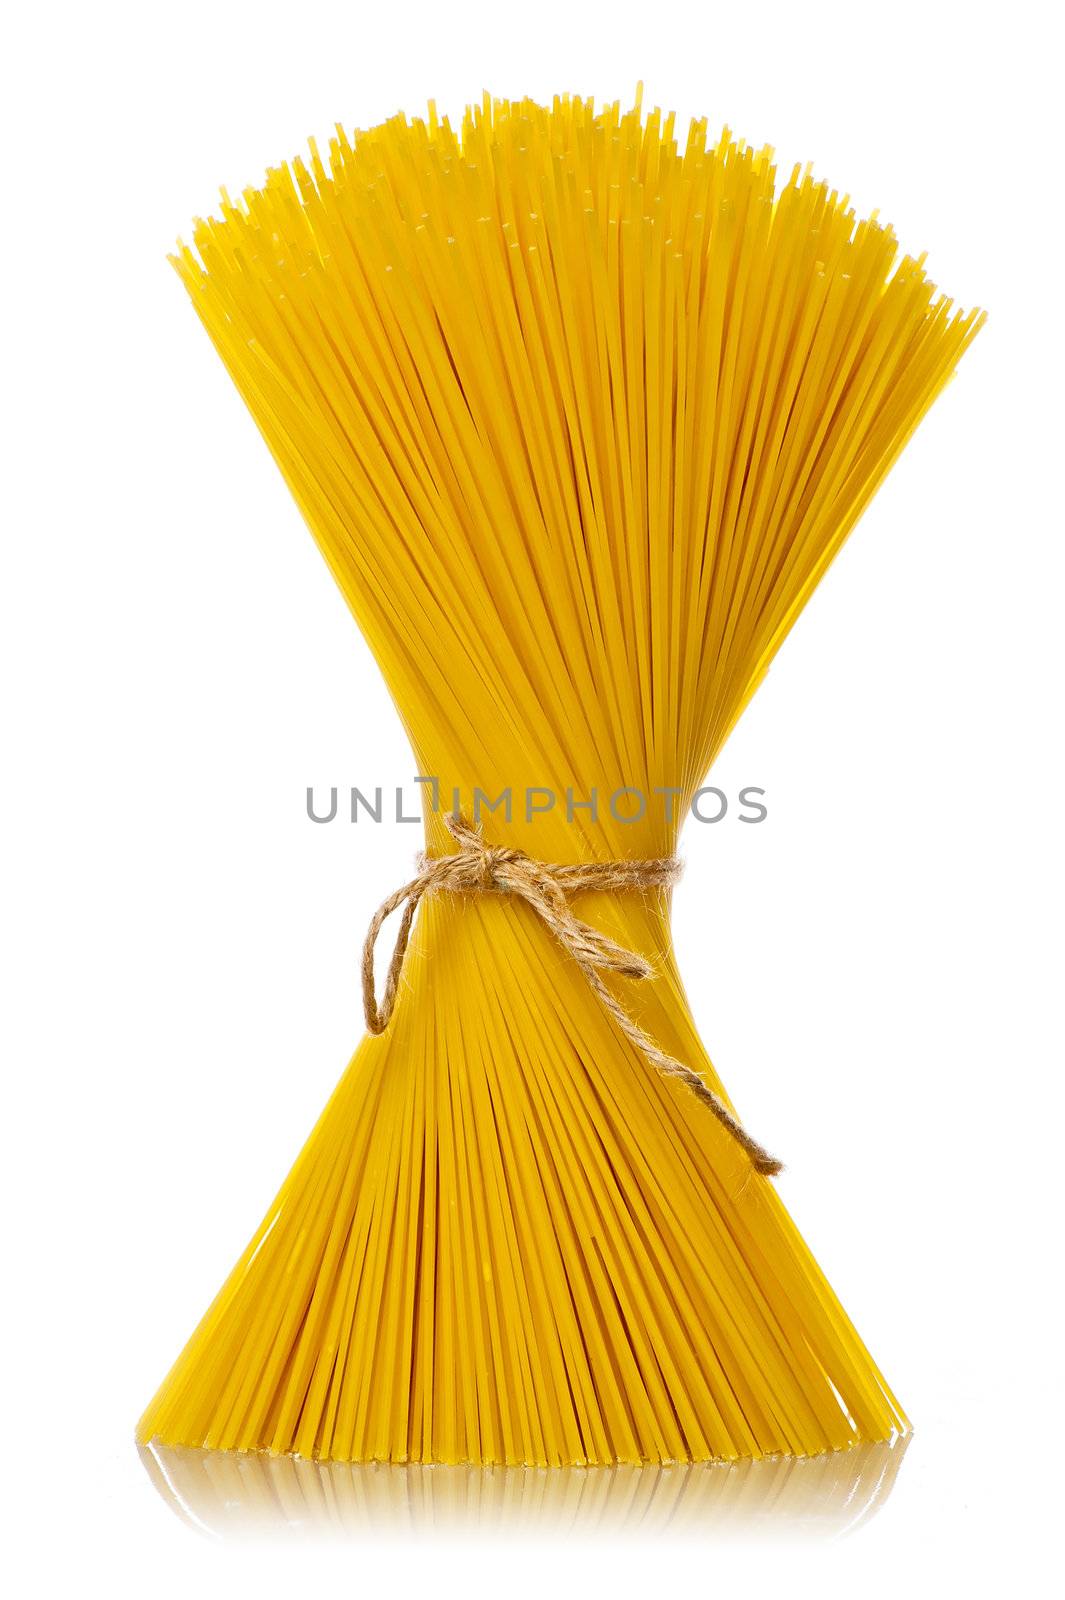 Bunch of spaghetti isolated on white background. by kosmsos111